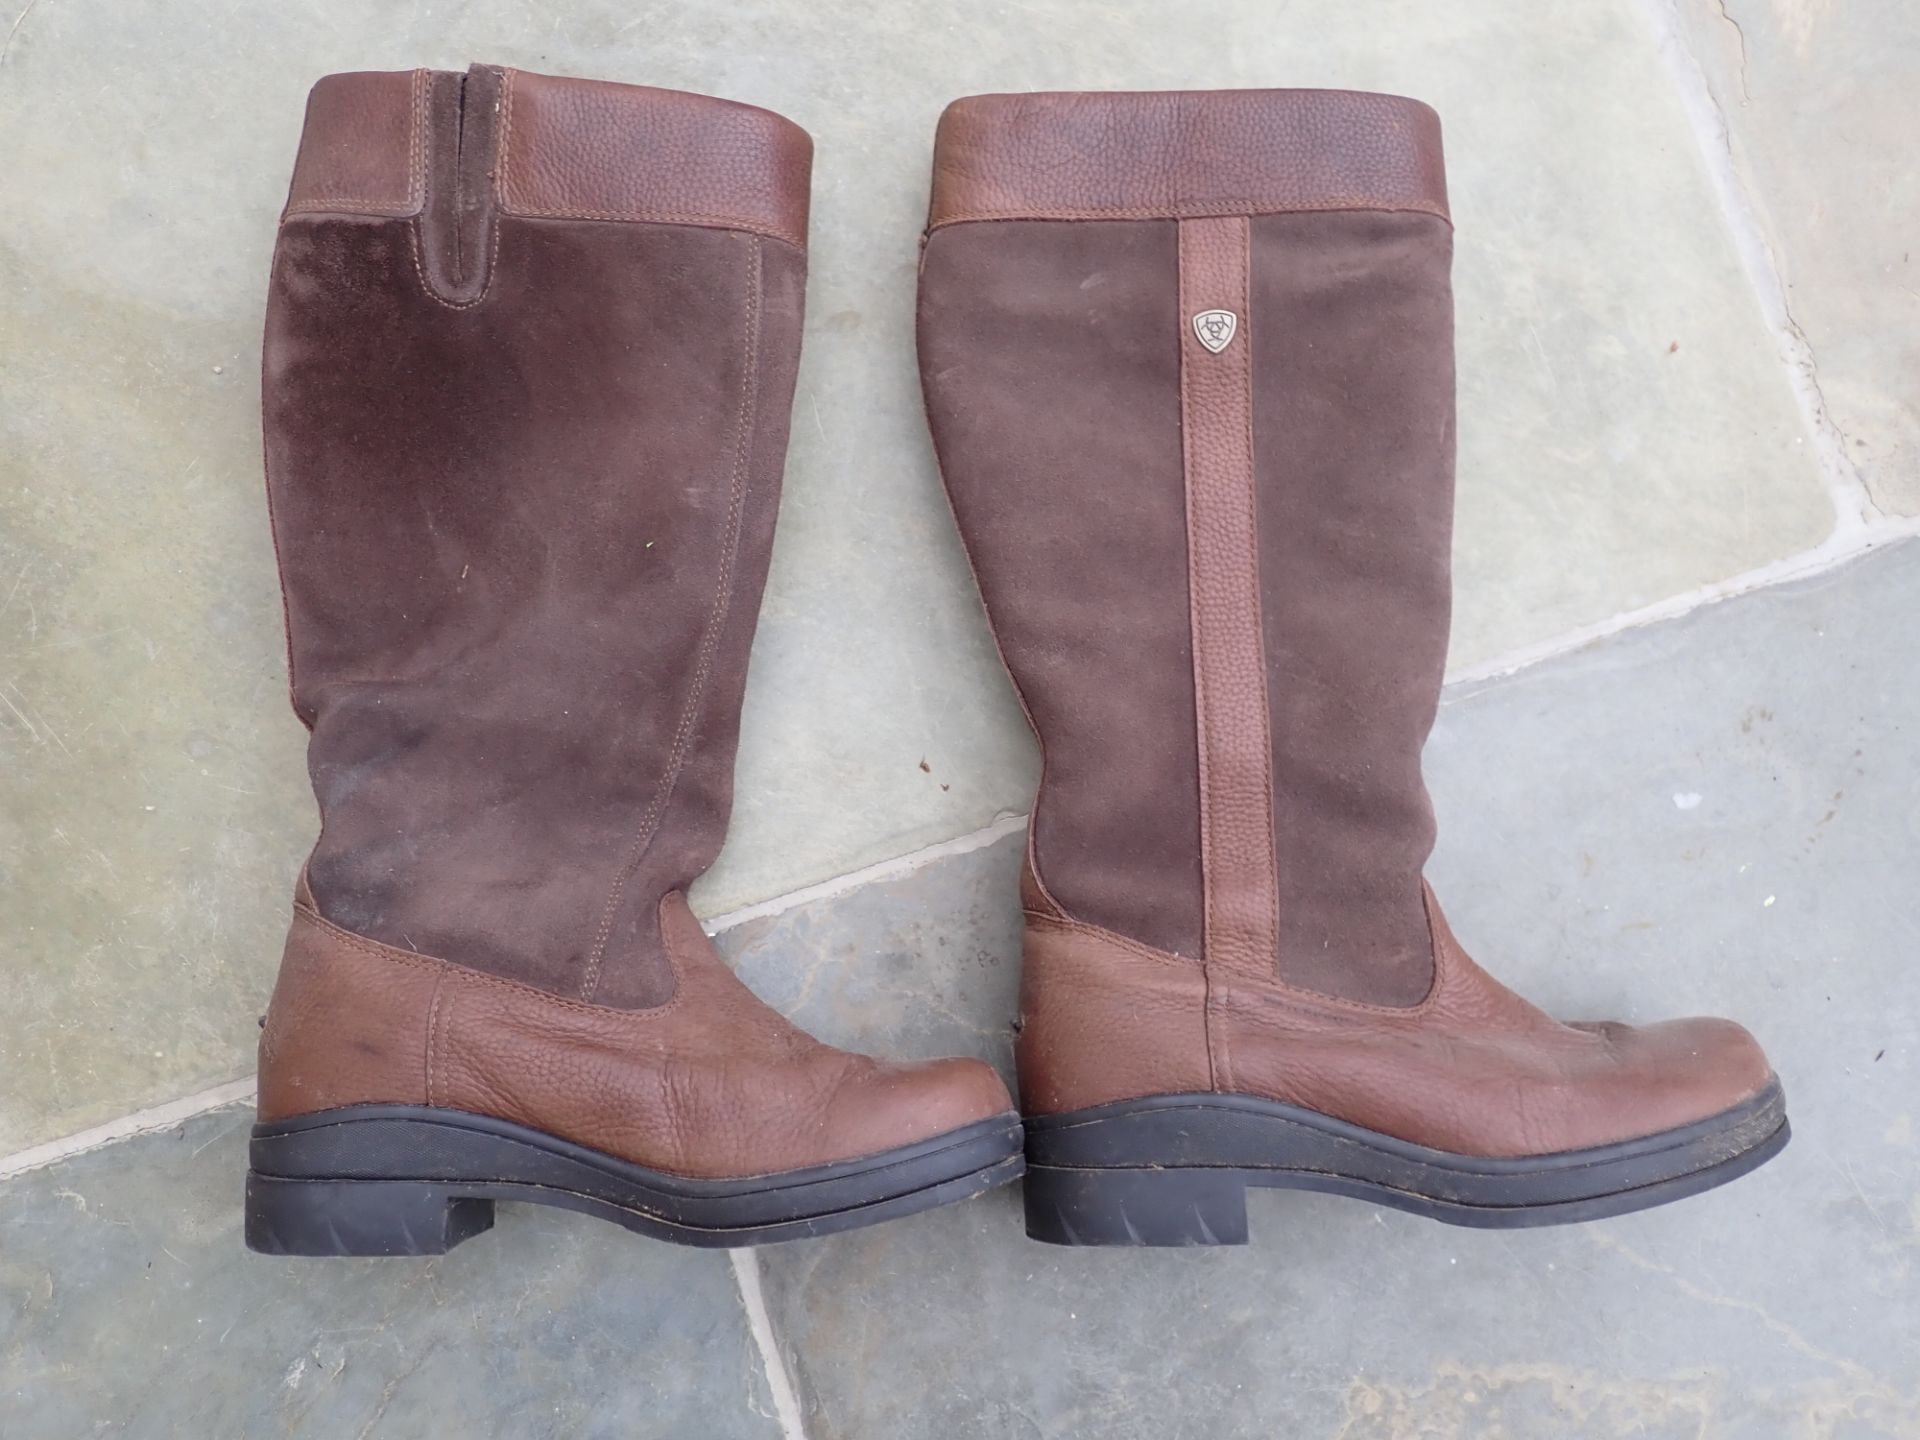 Ariat boots, size 6